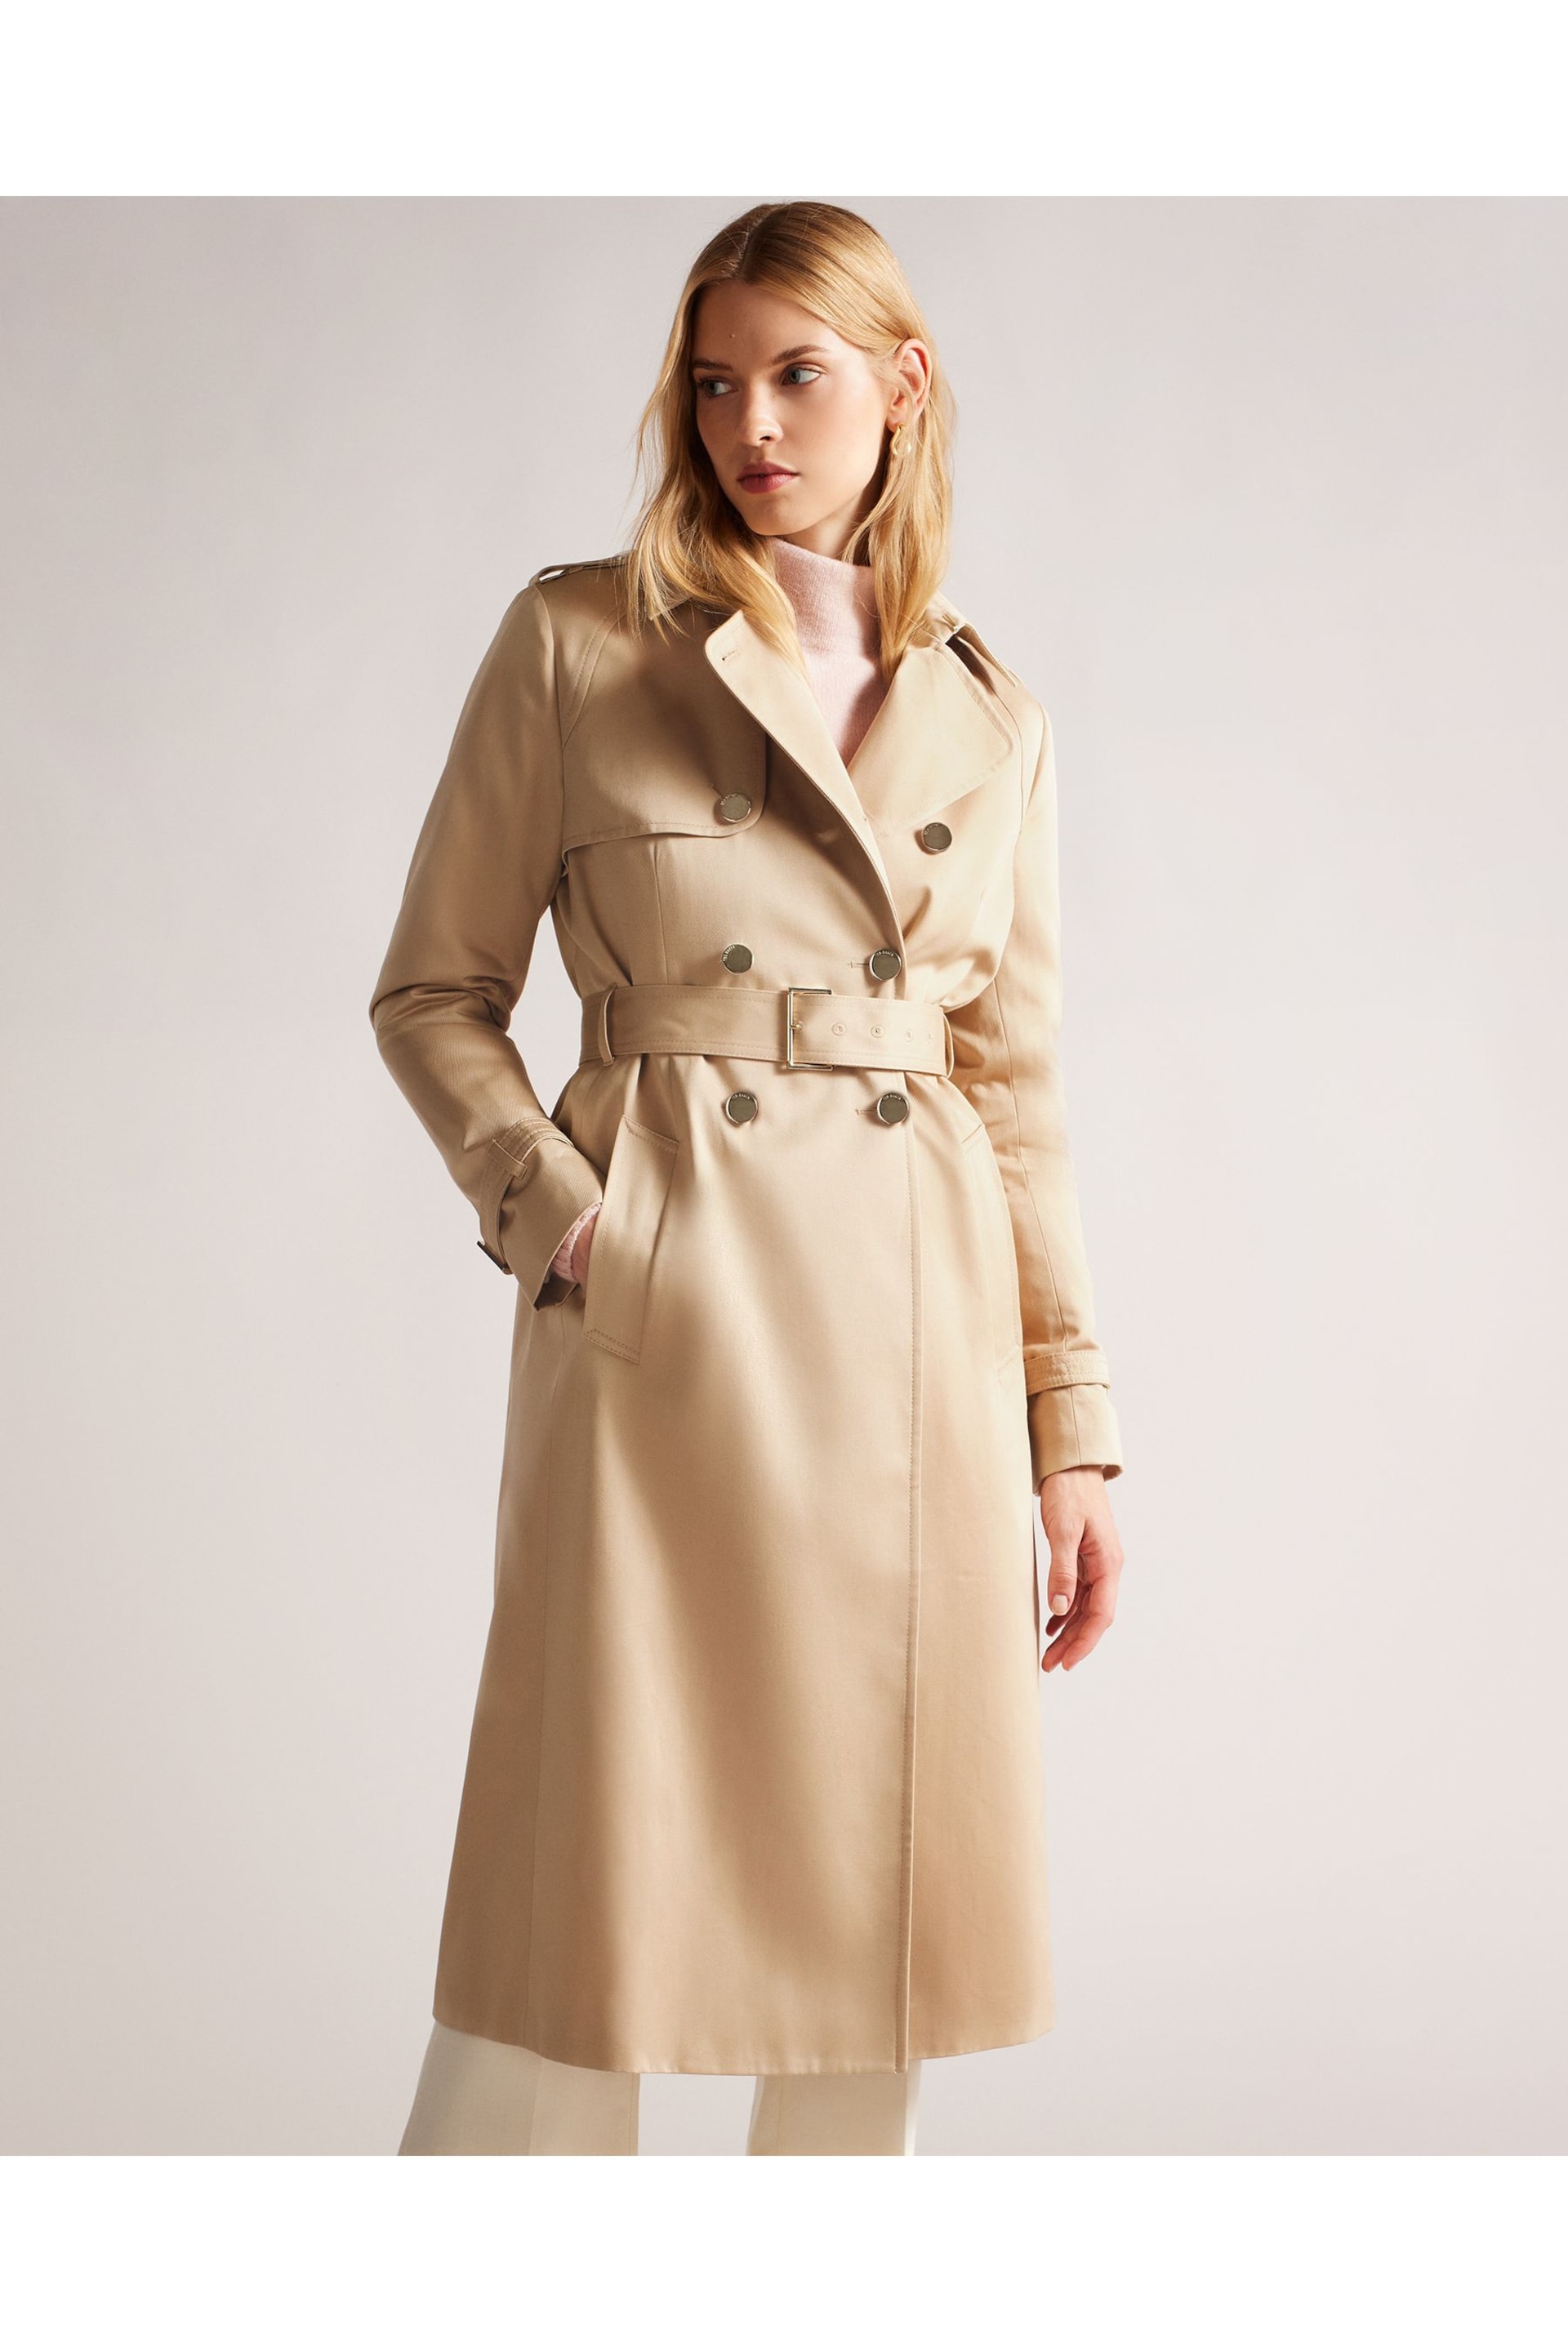 Ted Baker Natural Robbii Lightweight Trench Coat - Image 1 of 5